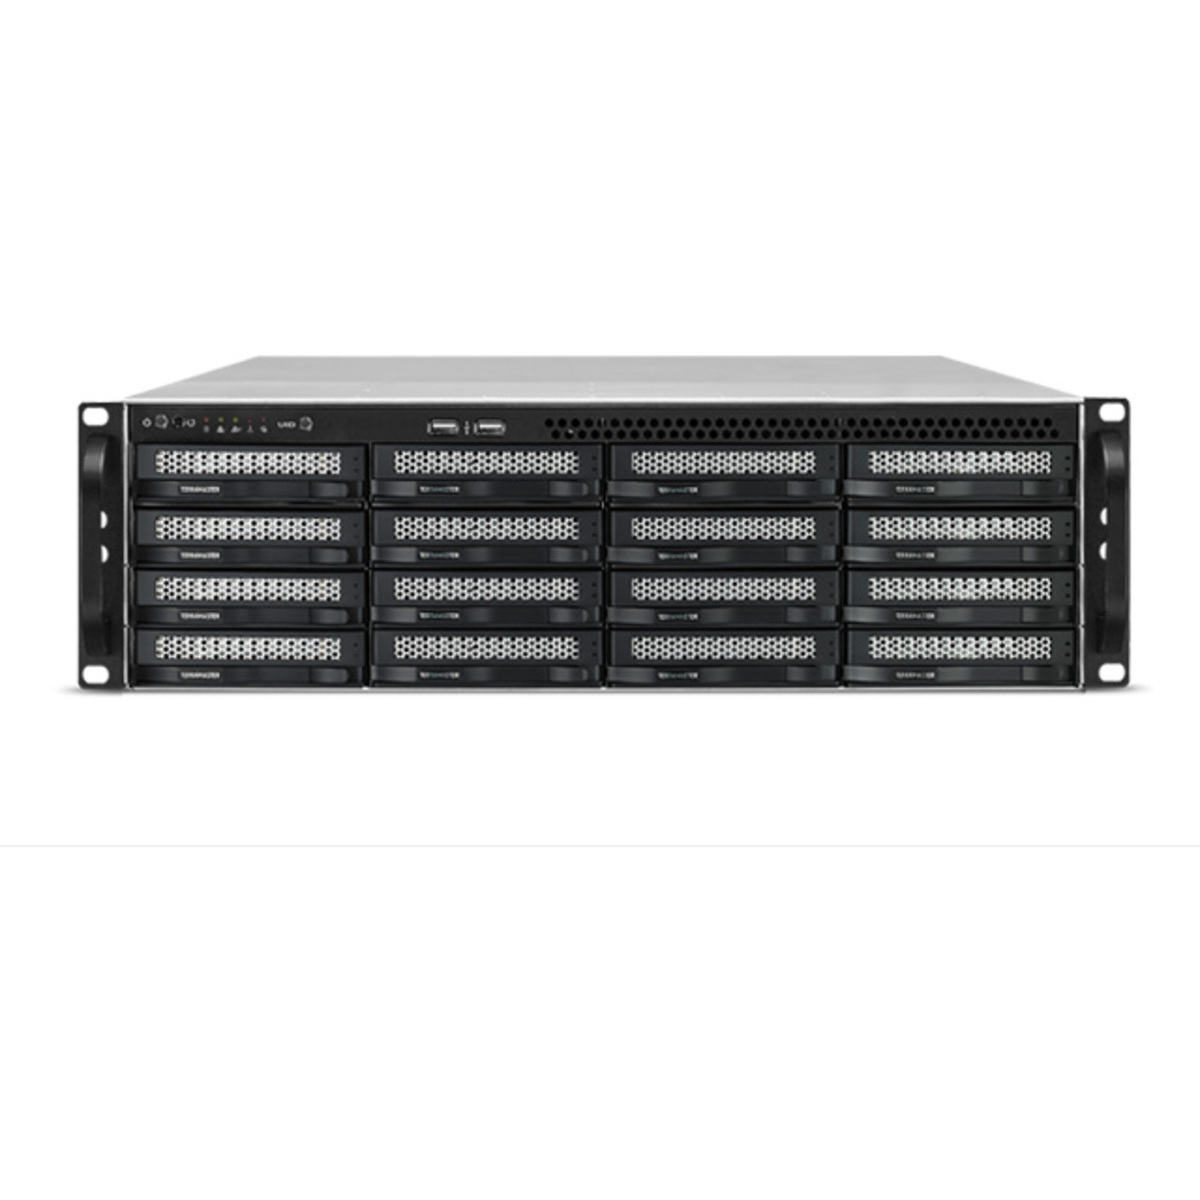 TerraMaster U16-722-2224 12tb 16-Bay RackMount Large Business / Enterprise NAS - Network Attached Storage Device 12x1tb Sandisk Ultra 3D SDSSDH3-1T00 2.5 560/520MB/s SATA 6Gb/s SSD CONSUMER Class Drives Installed - Burn-In Tested U16-722-2224